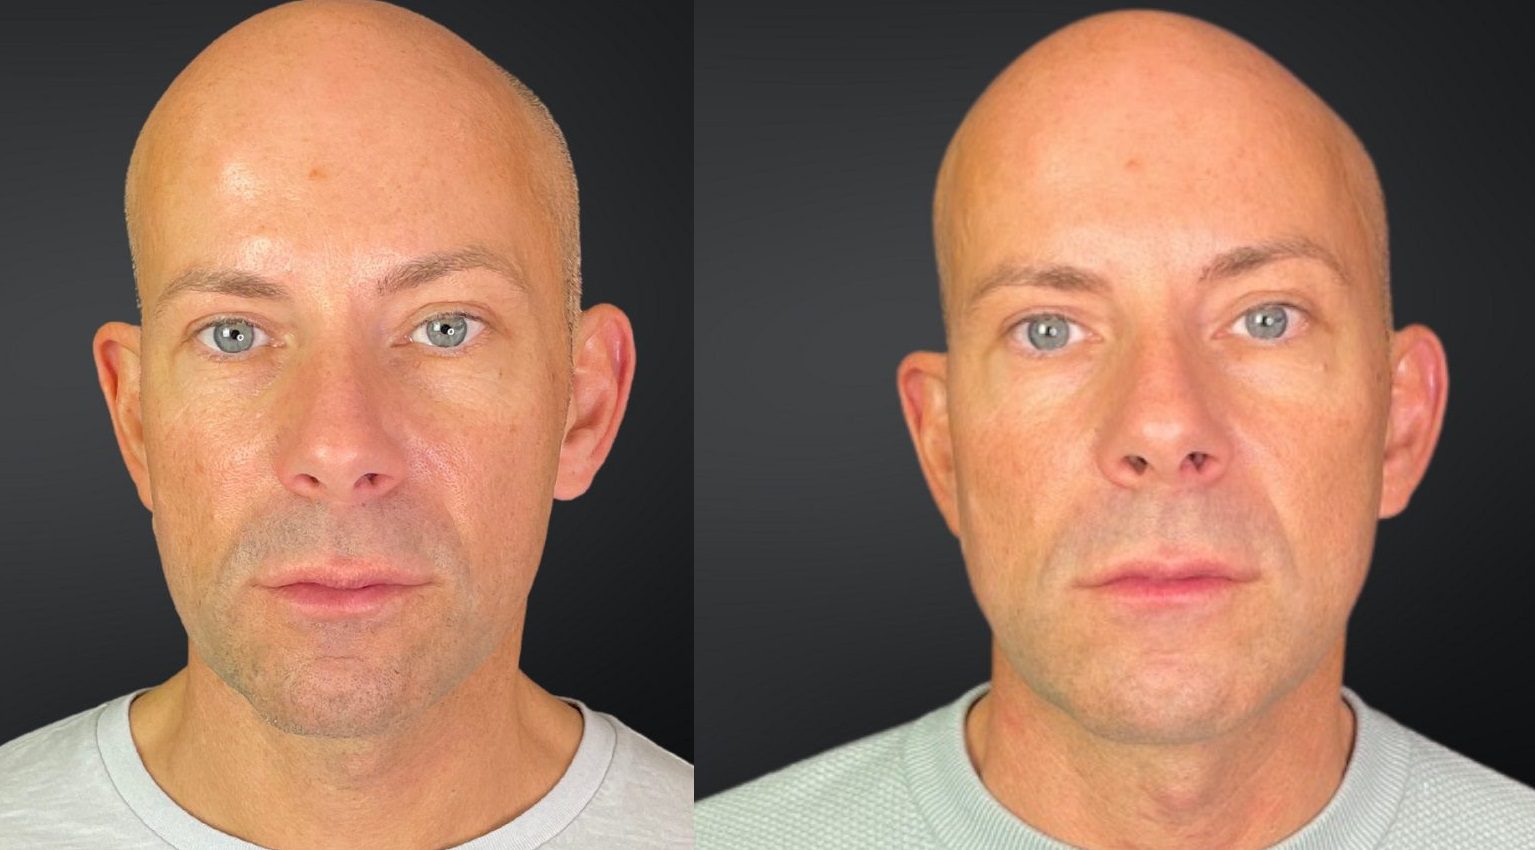 dermal fillers jawline contour lower facelift before and after